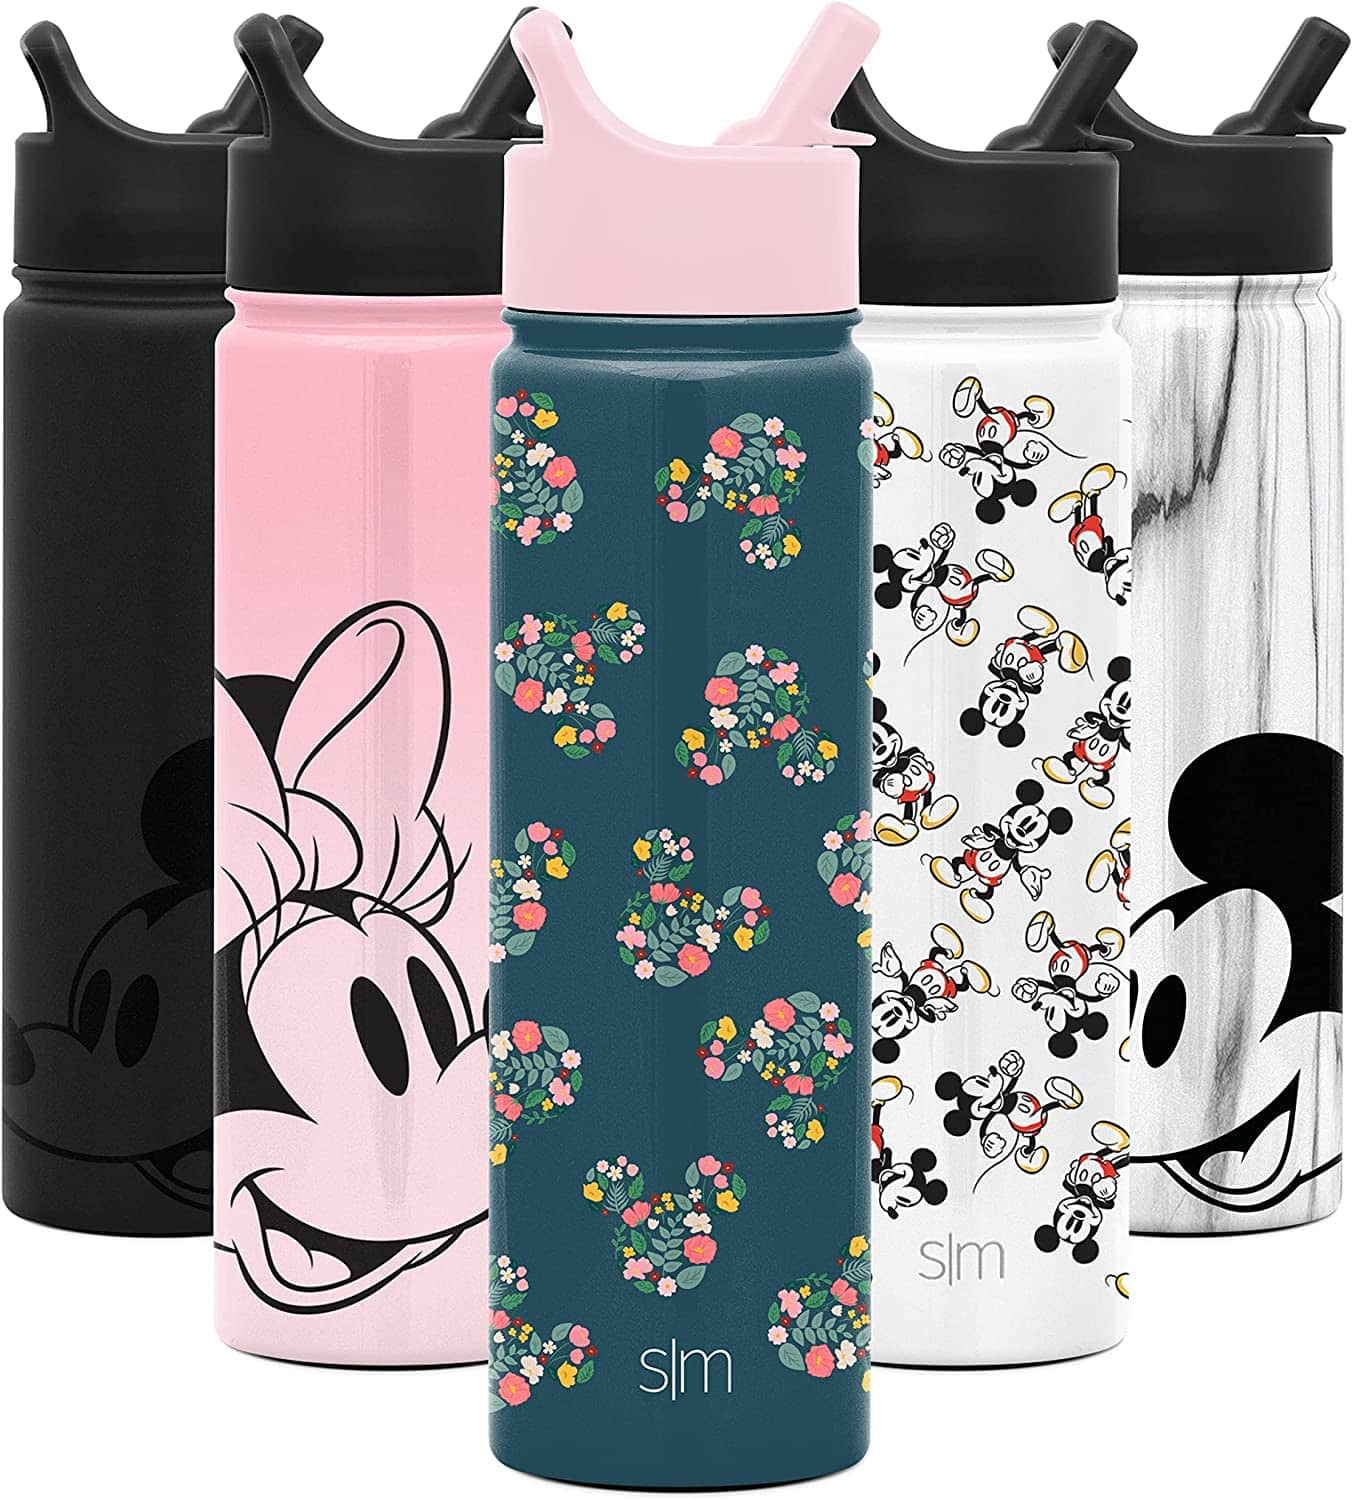 Mickey and Minnie Mouse water bottles 